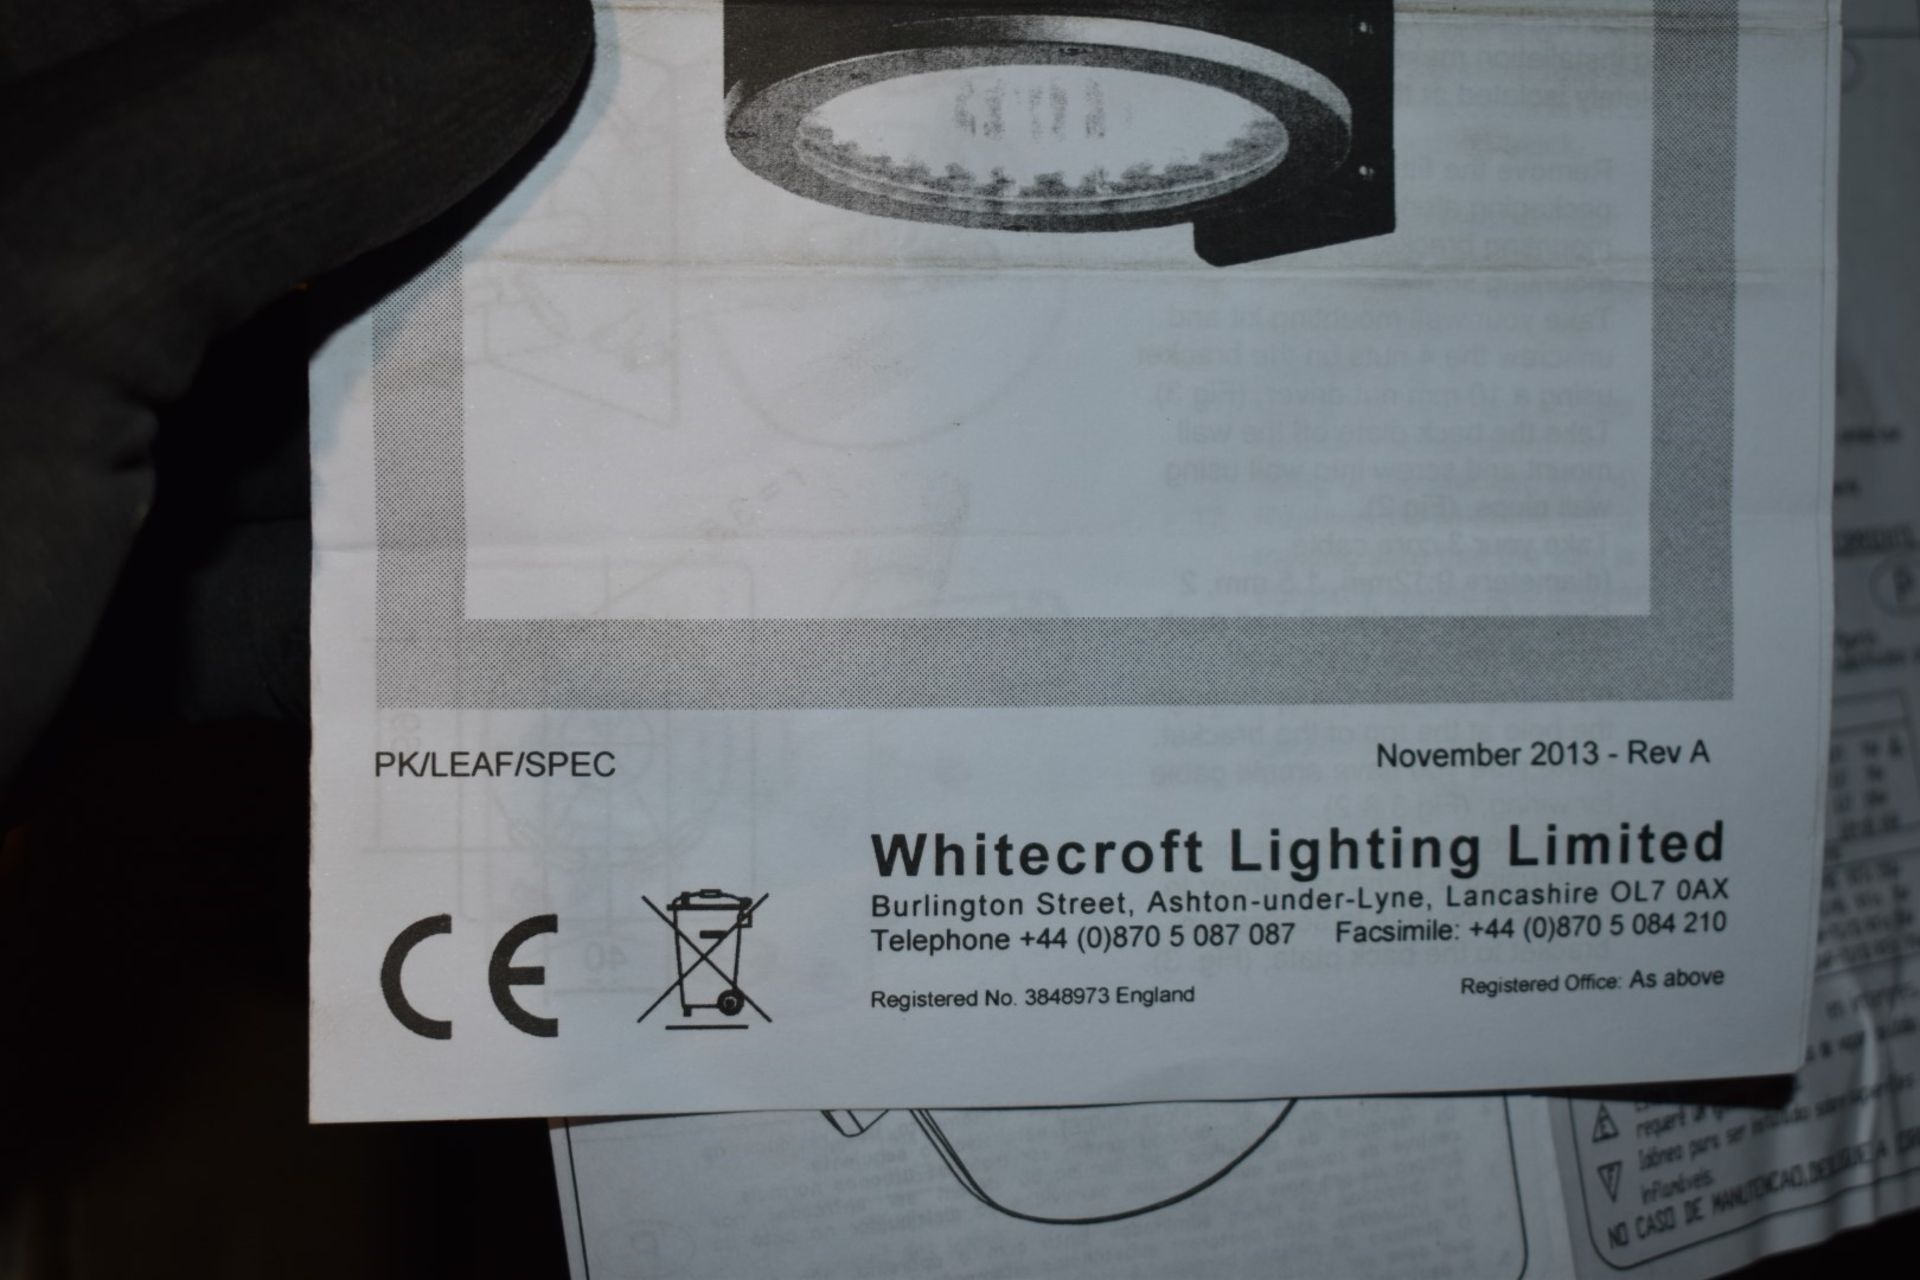 1 x Whitecroft Lighting Spectre WR Wall Mounted Cylindrical LED Luminaire for Outdoor Applications - Image 4 of 6